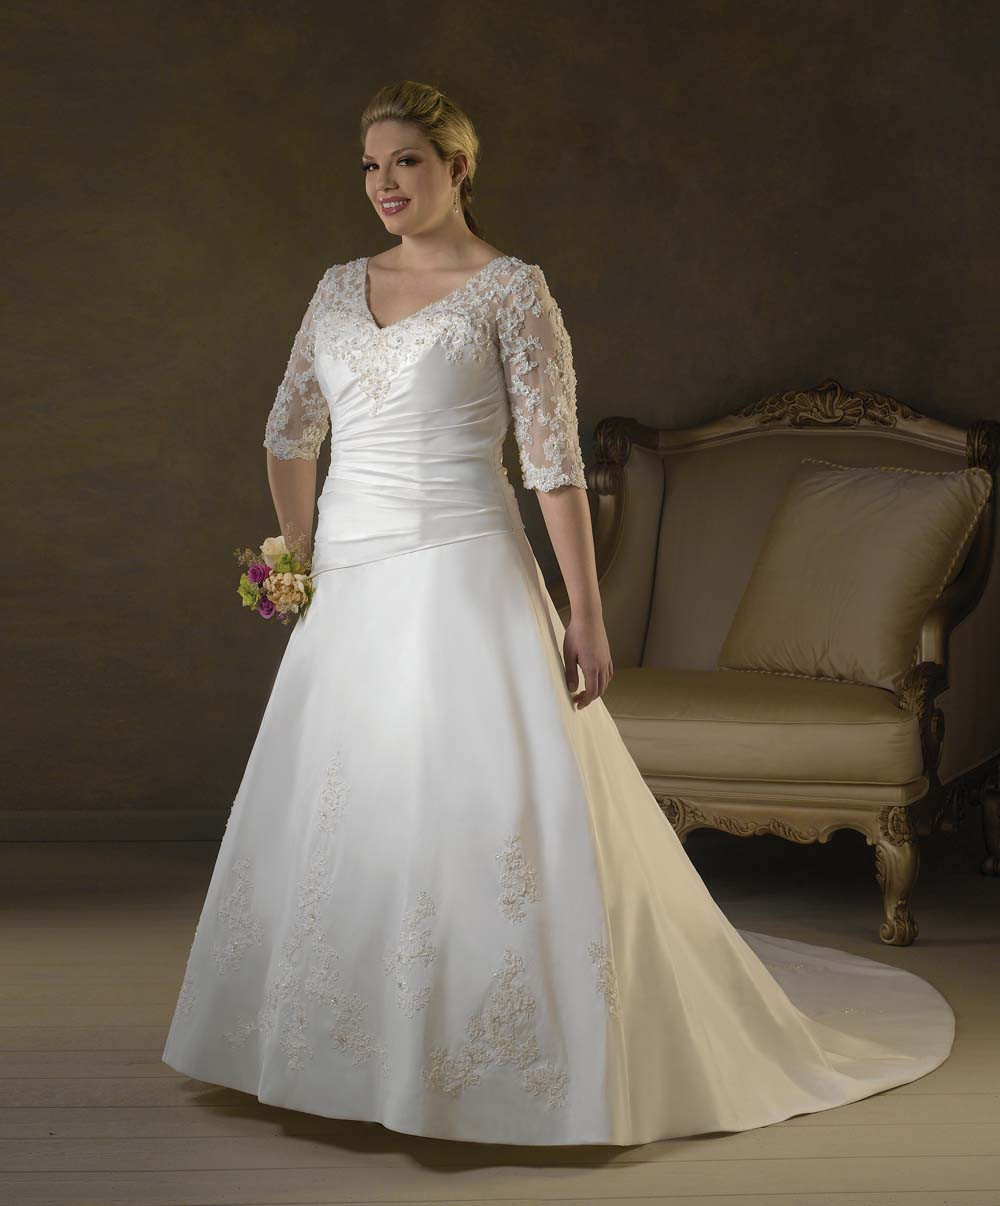 Wedding Dresses Plus Size With Sleeves
 Plus Size 3 4 Lace Sleeves Wedding Dress Gown